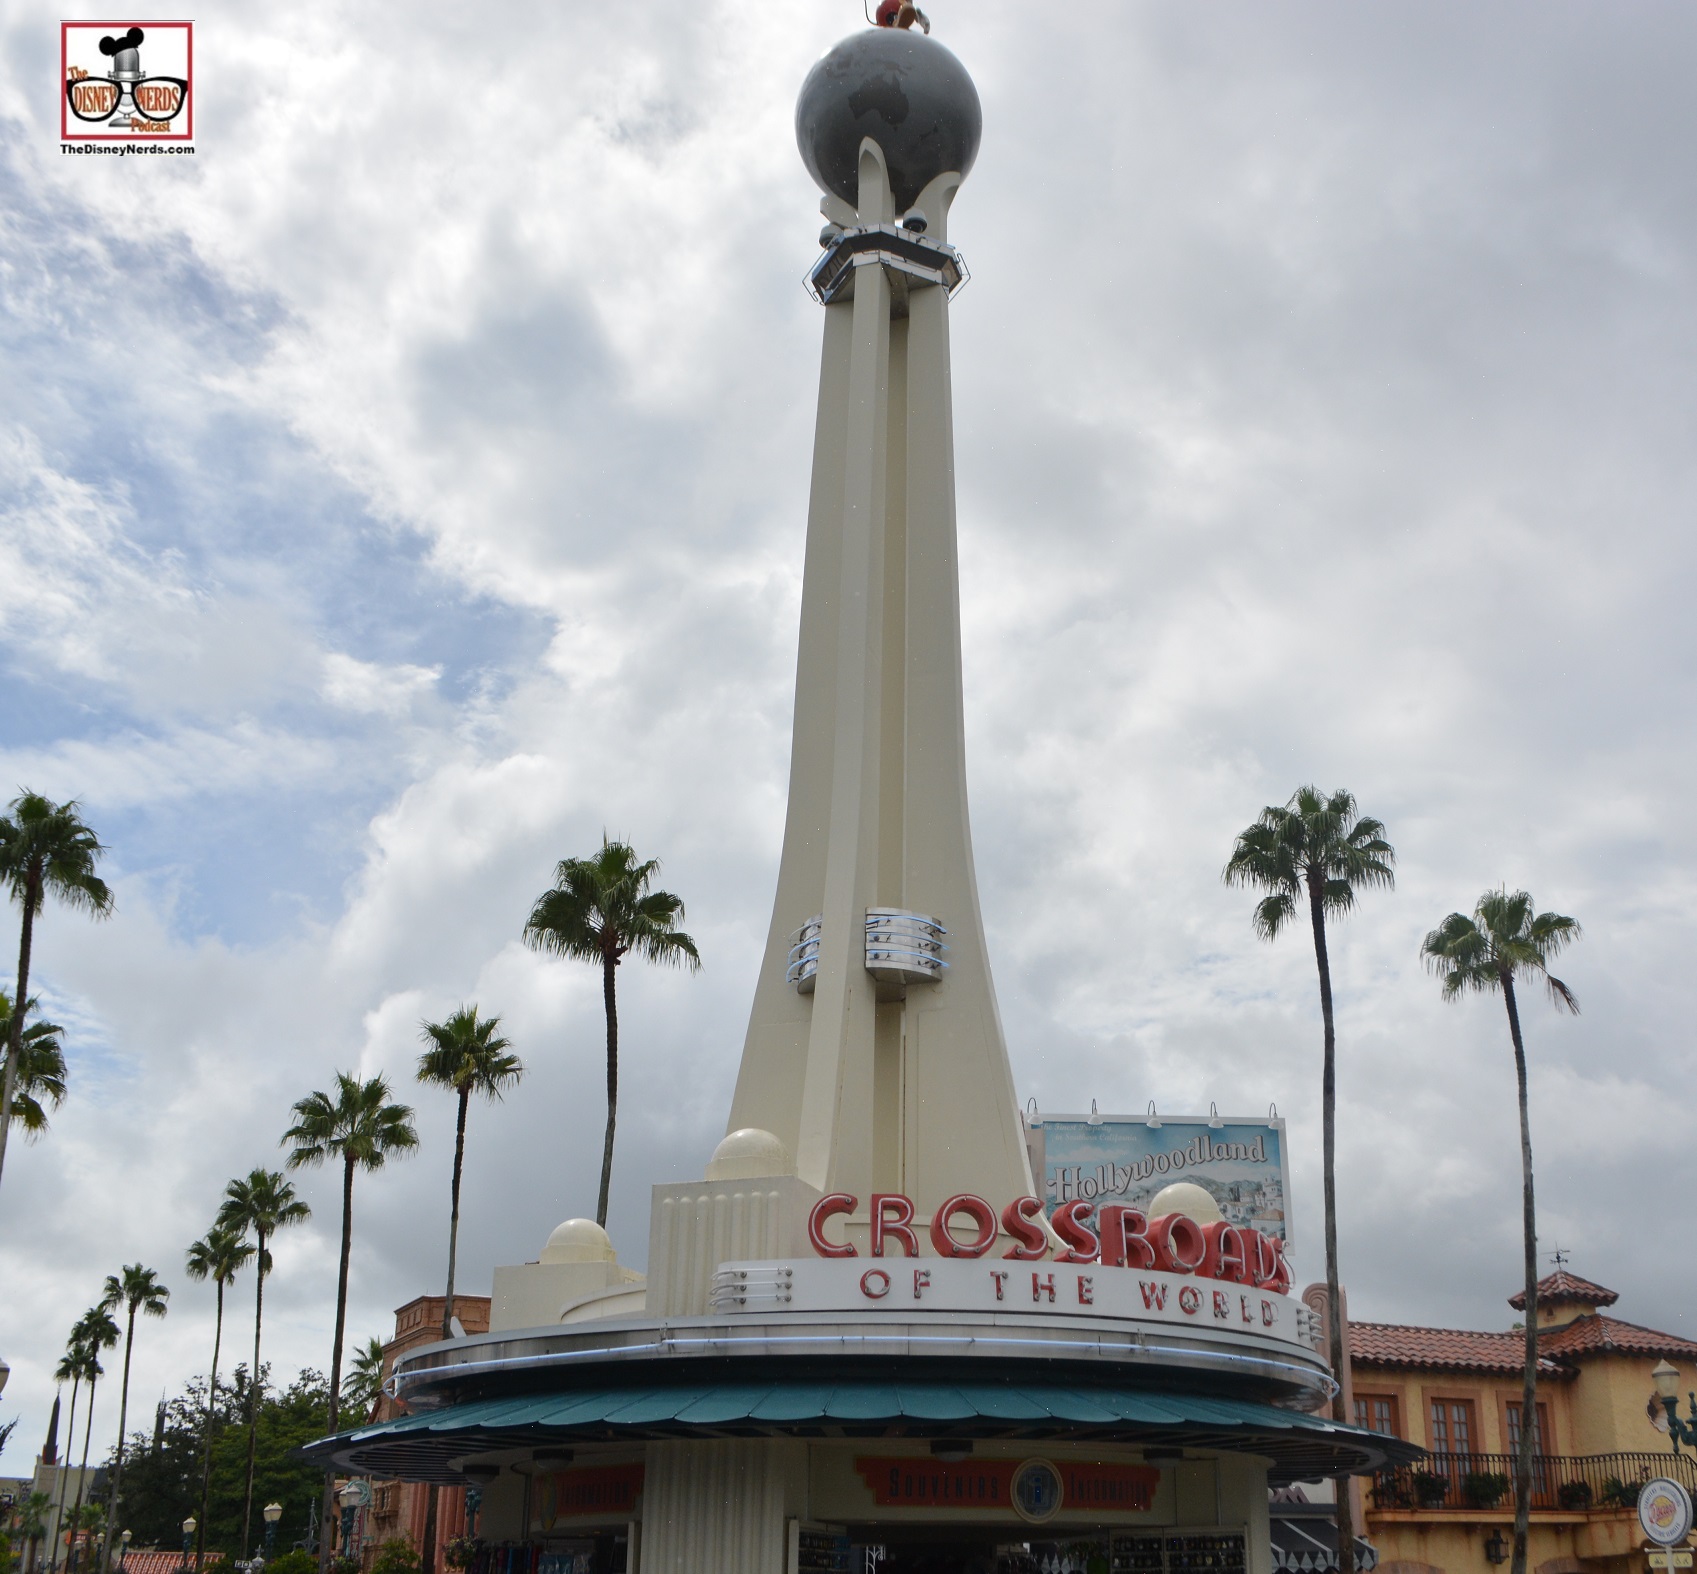 Hollywood Studios Crossroads of the World - a little cloudy, but that keeps the hot sun away..